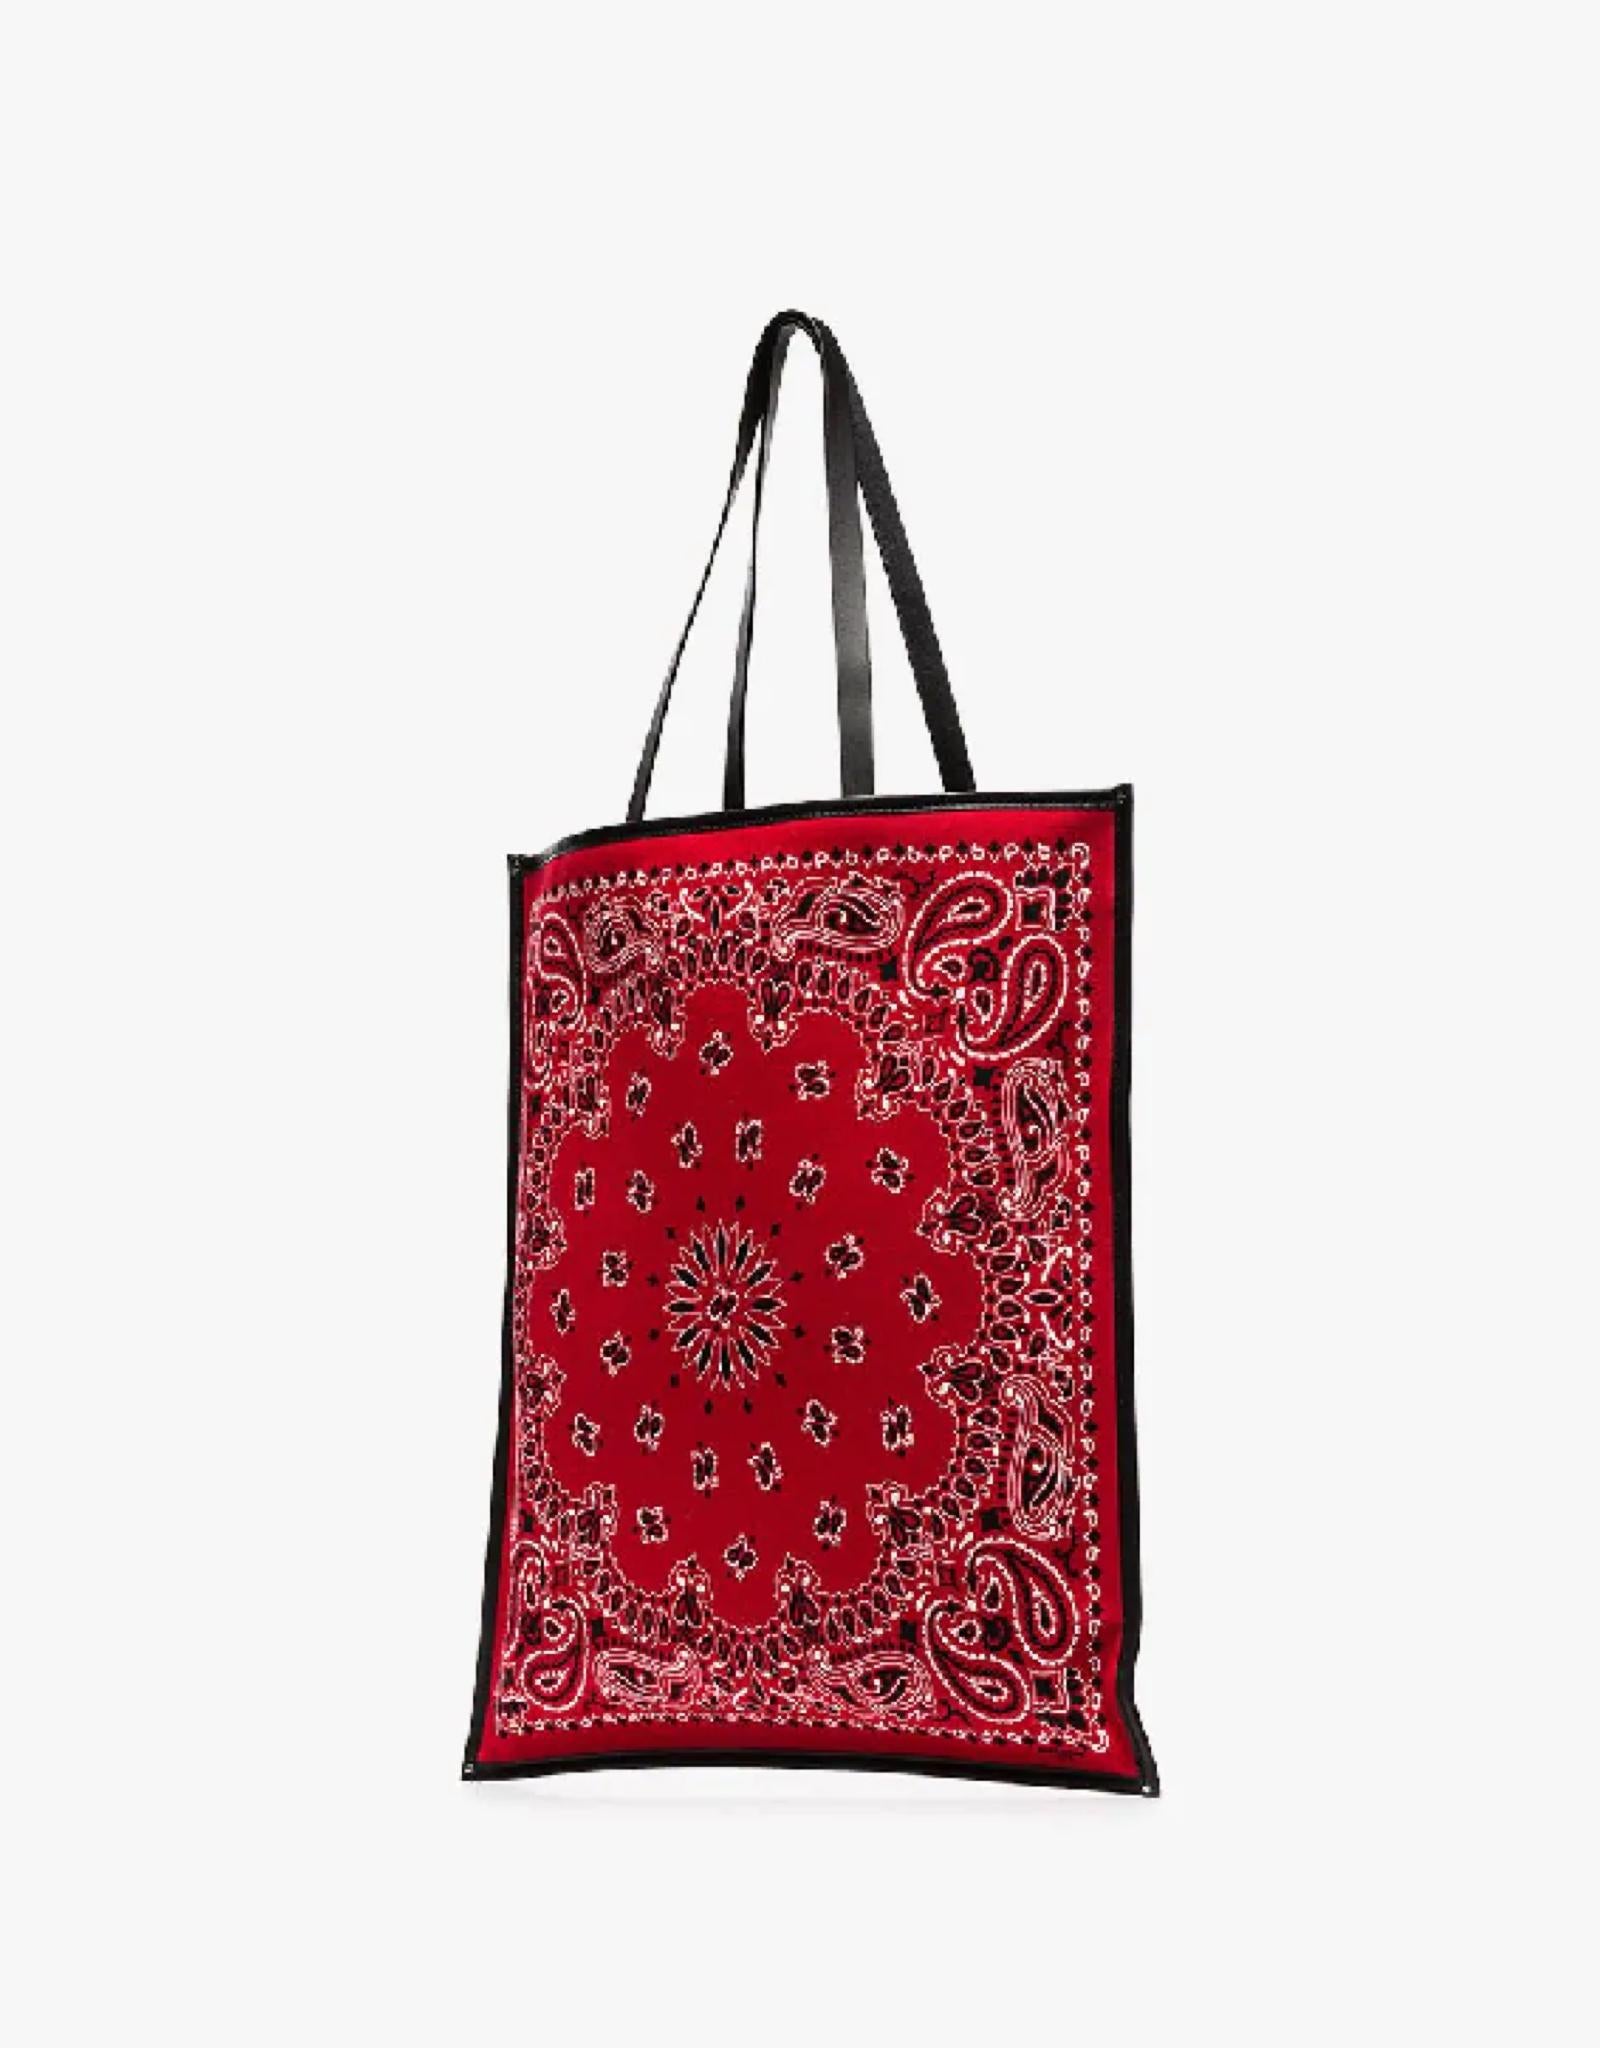 This red Saint Laurent Bandana tote bag is made from cotton and features dual flat leather top handles, a rectangular shape, leather linings and a red bandana color with a printed paisley pattern in contrasting white and black. The paisley pattern